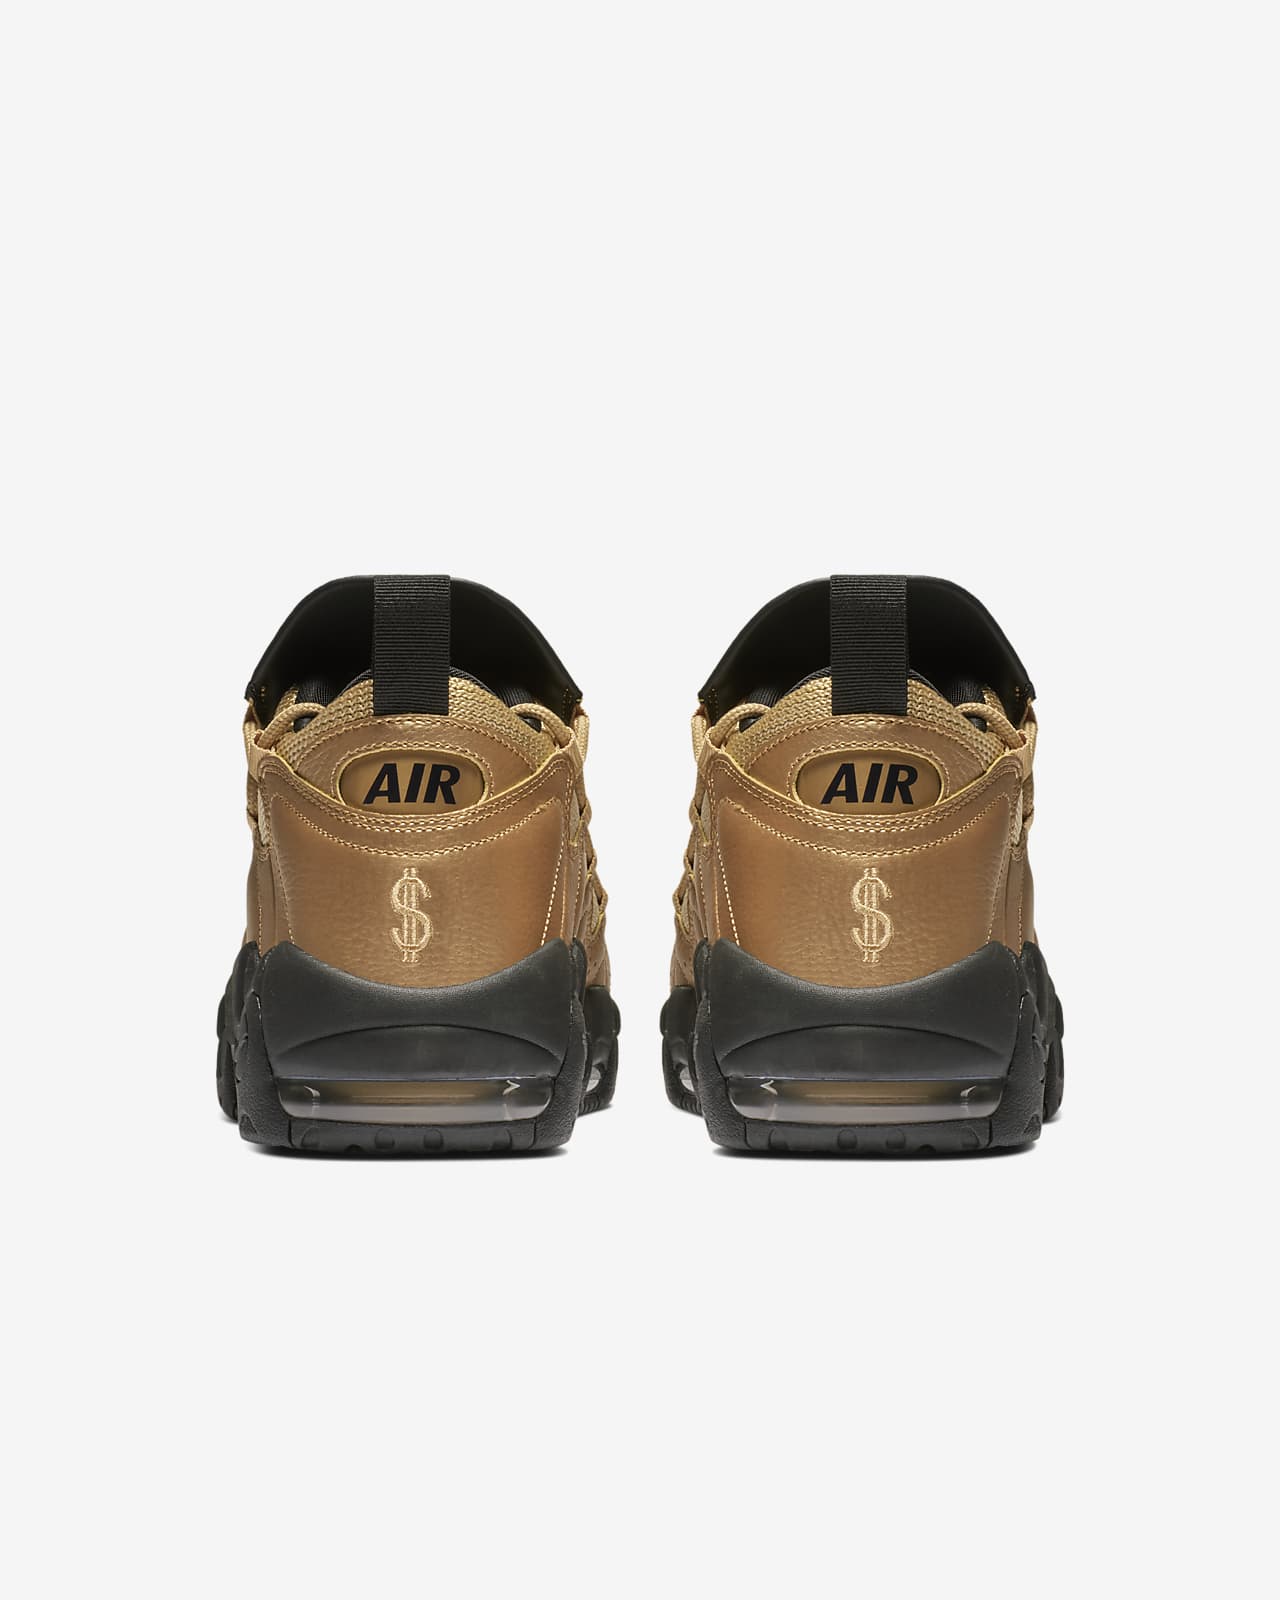 air money shoes price